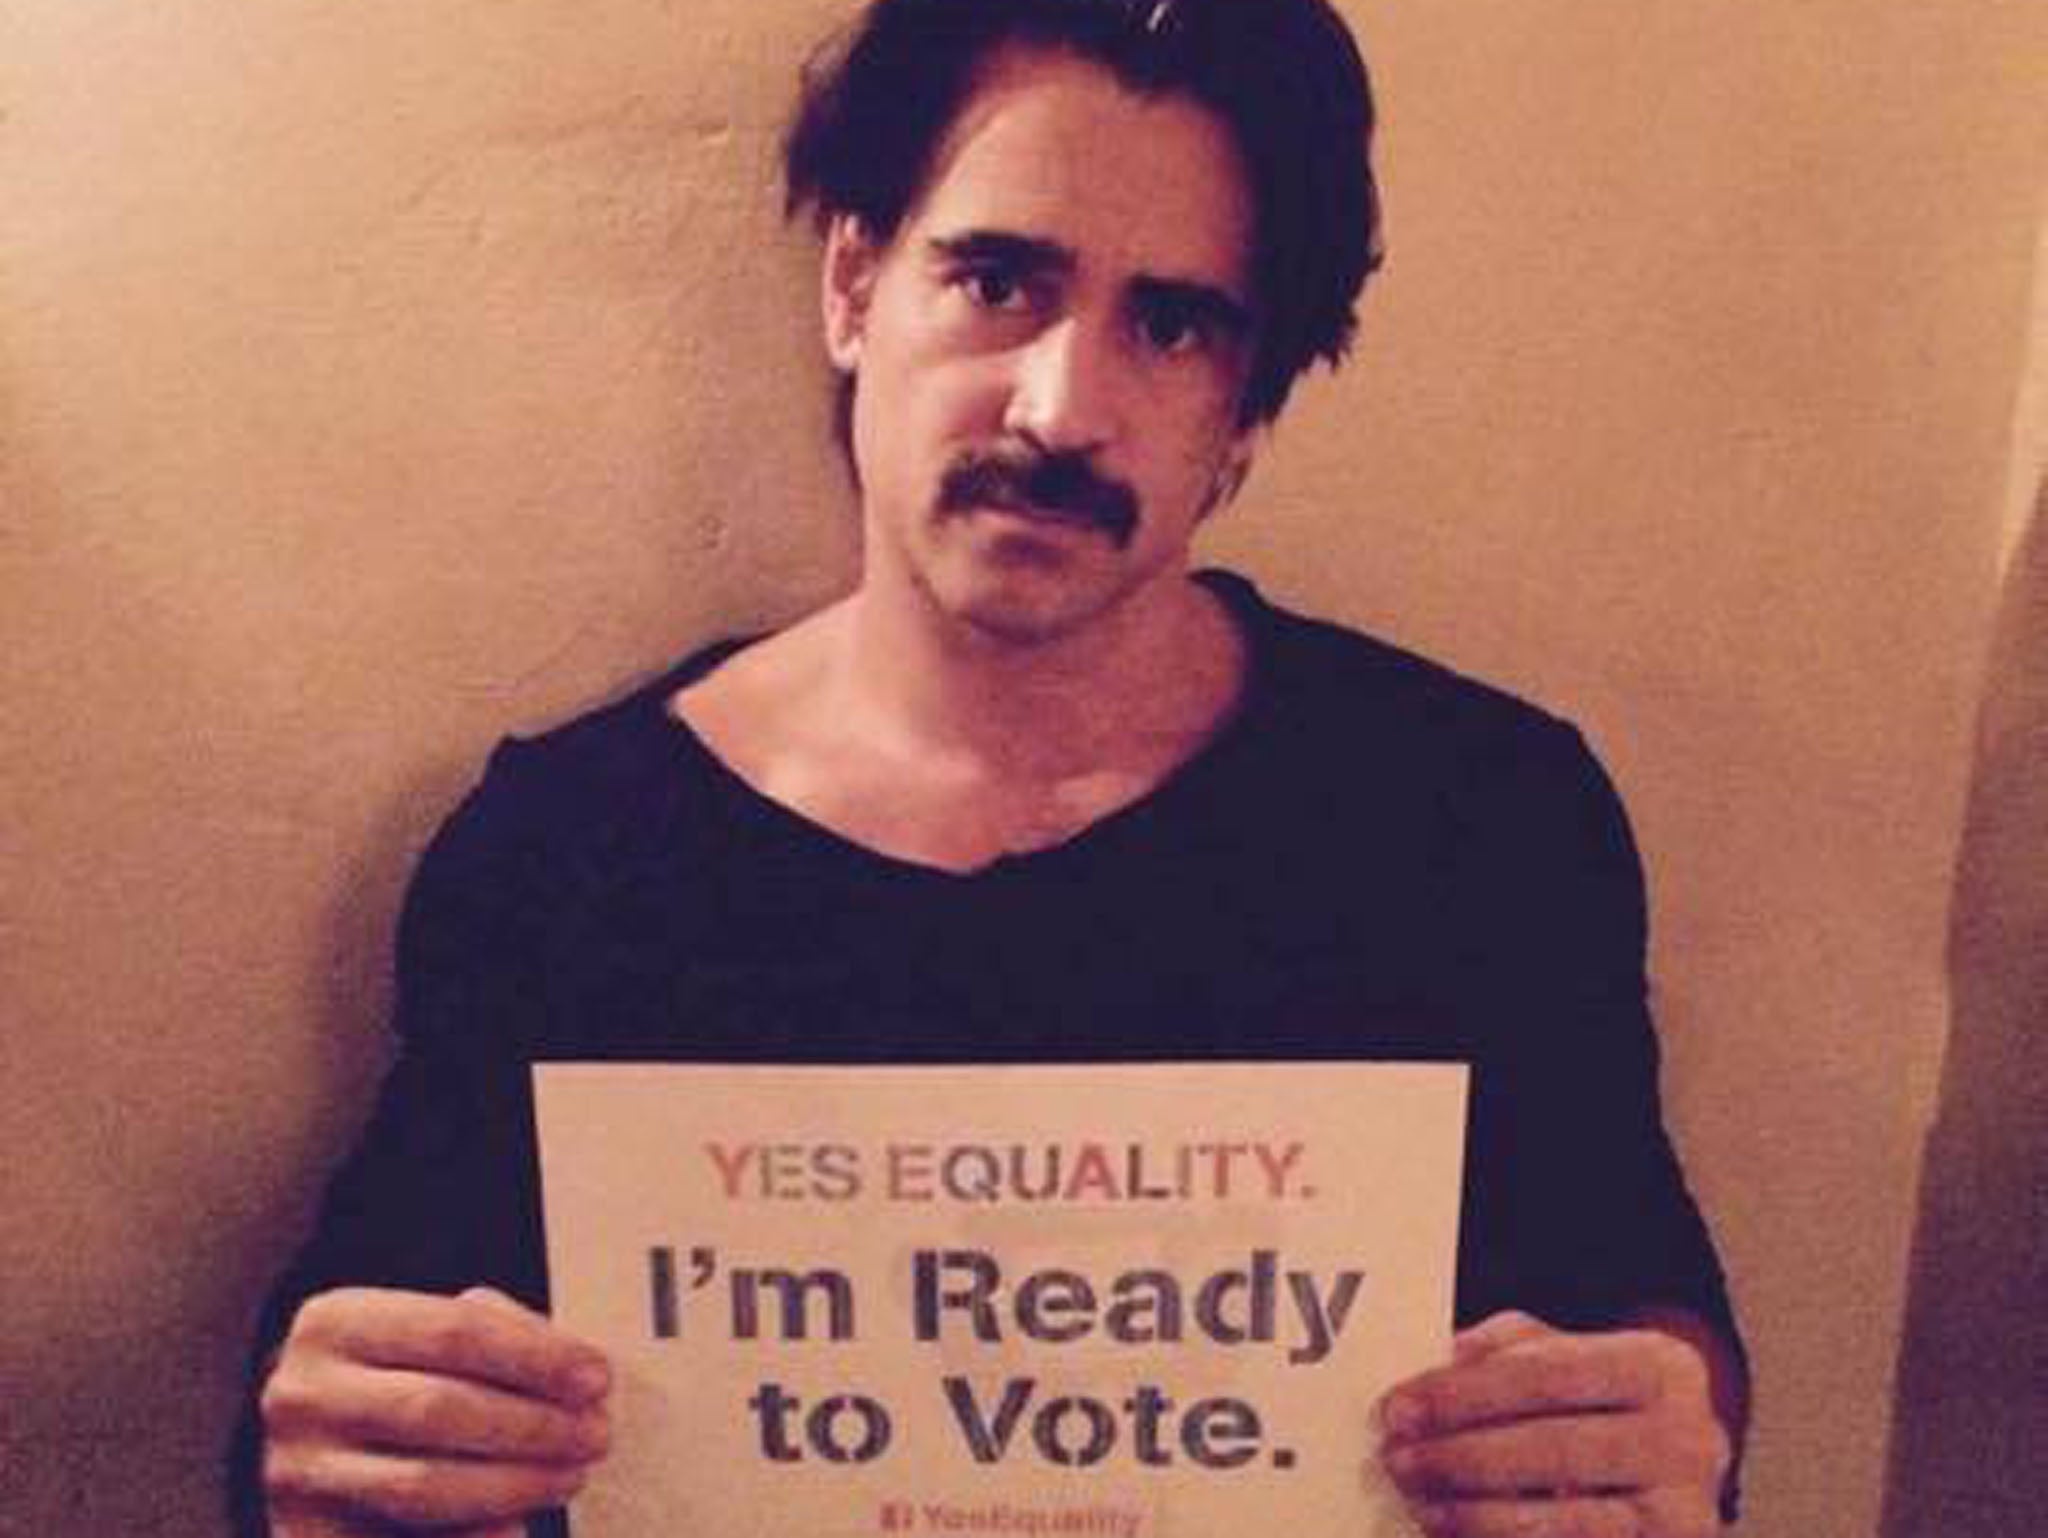 Colin Farrell Pledges Support For Yes Equality Campaign Ahead Of 